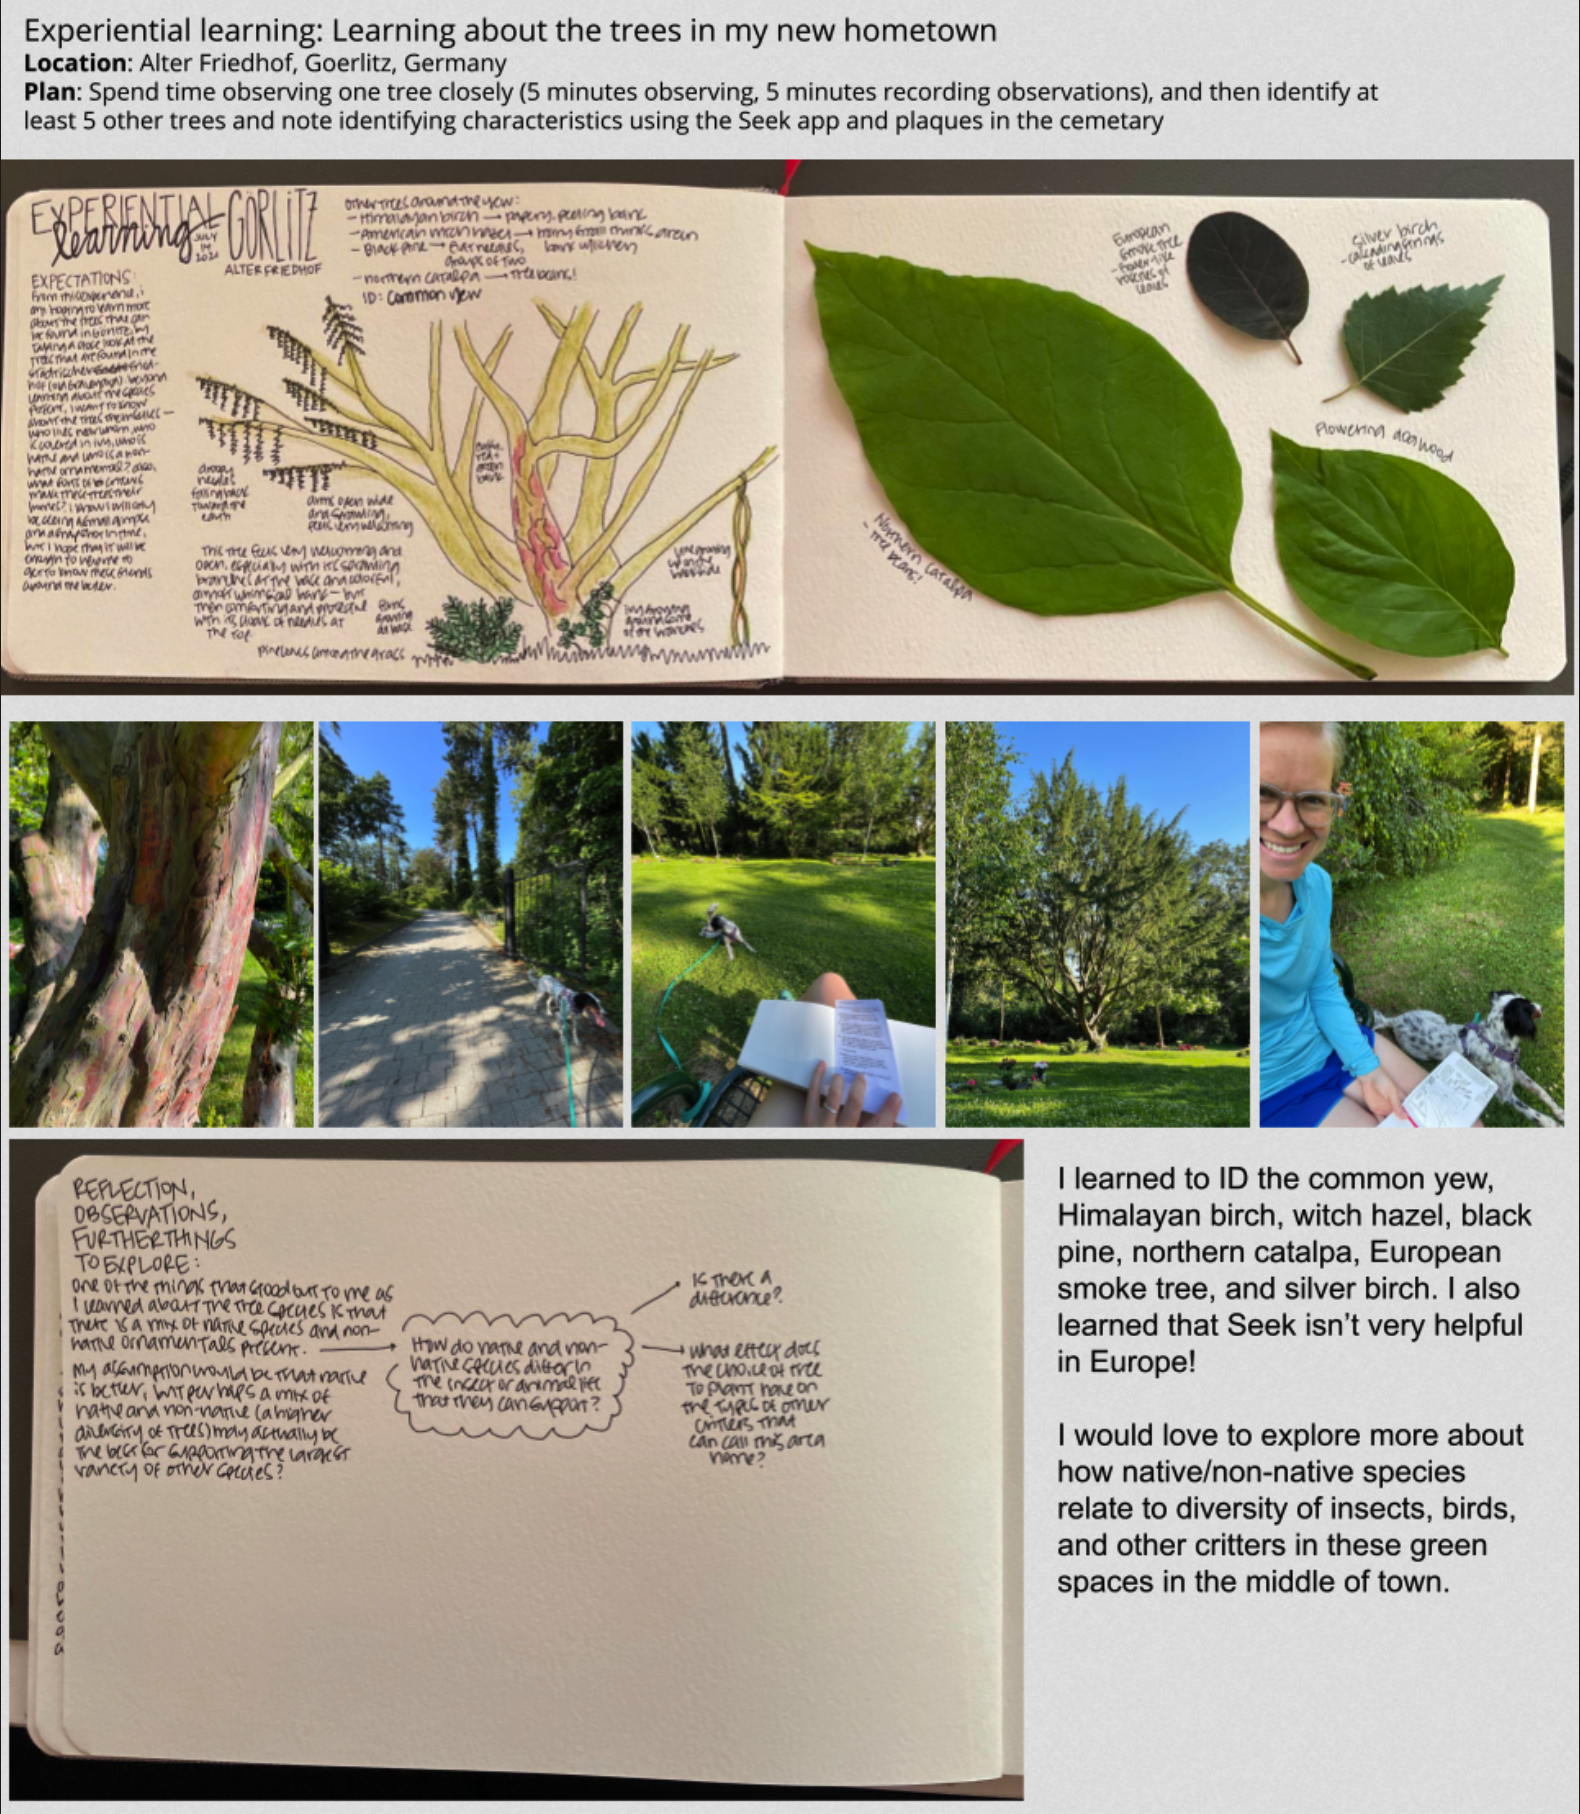 experiential learning: learning about the trees in my new hometown, photos of journal entries and trees